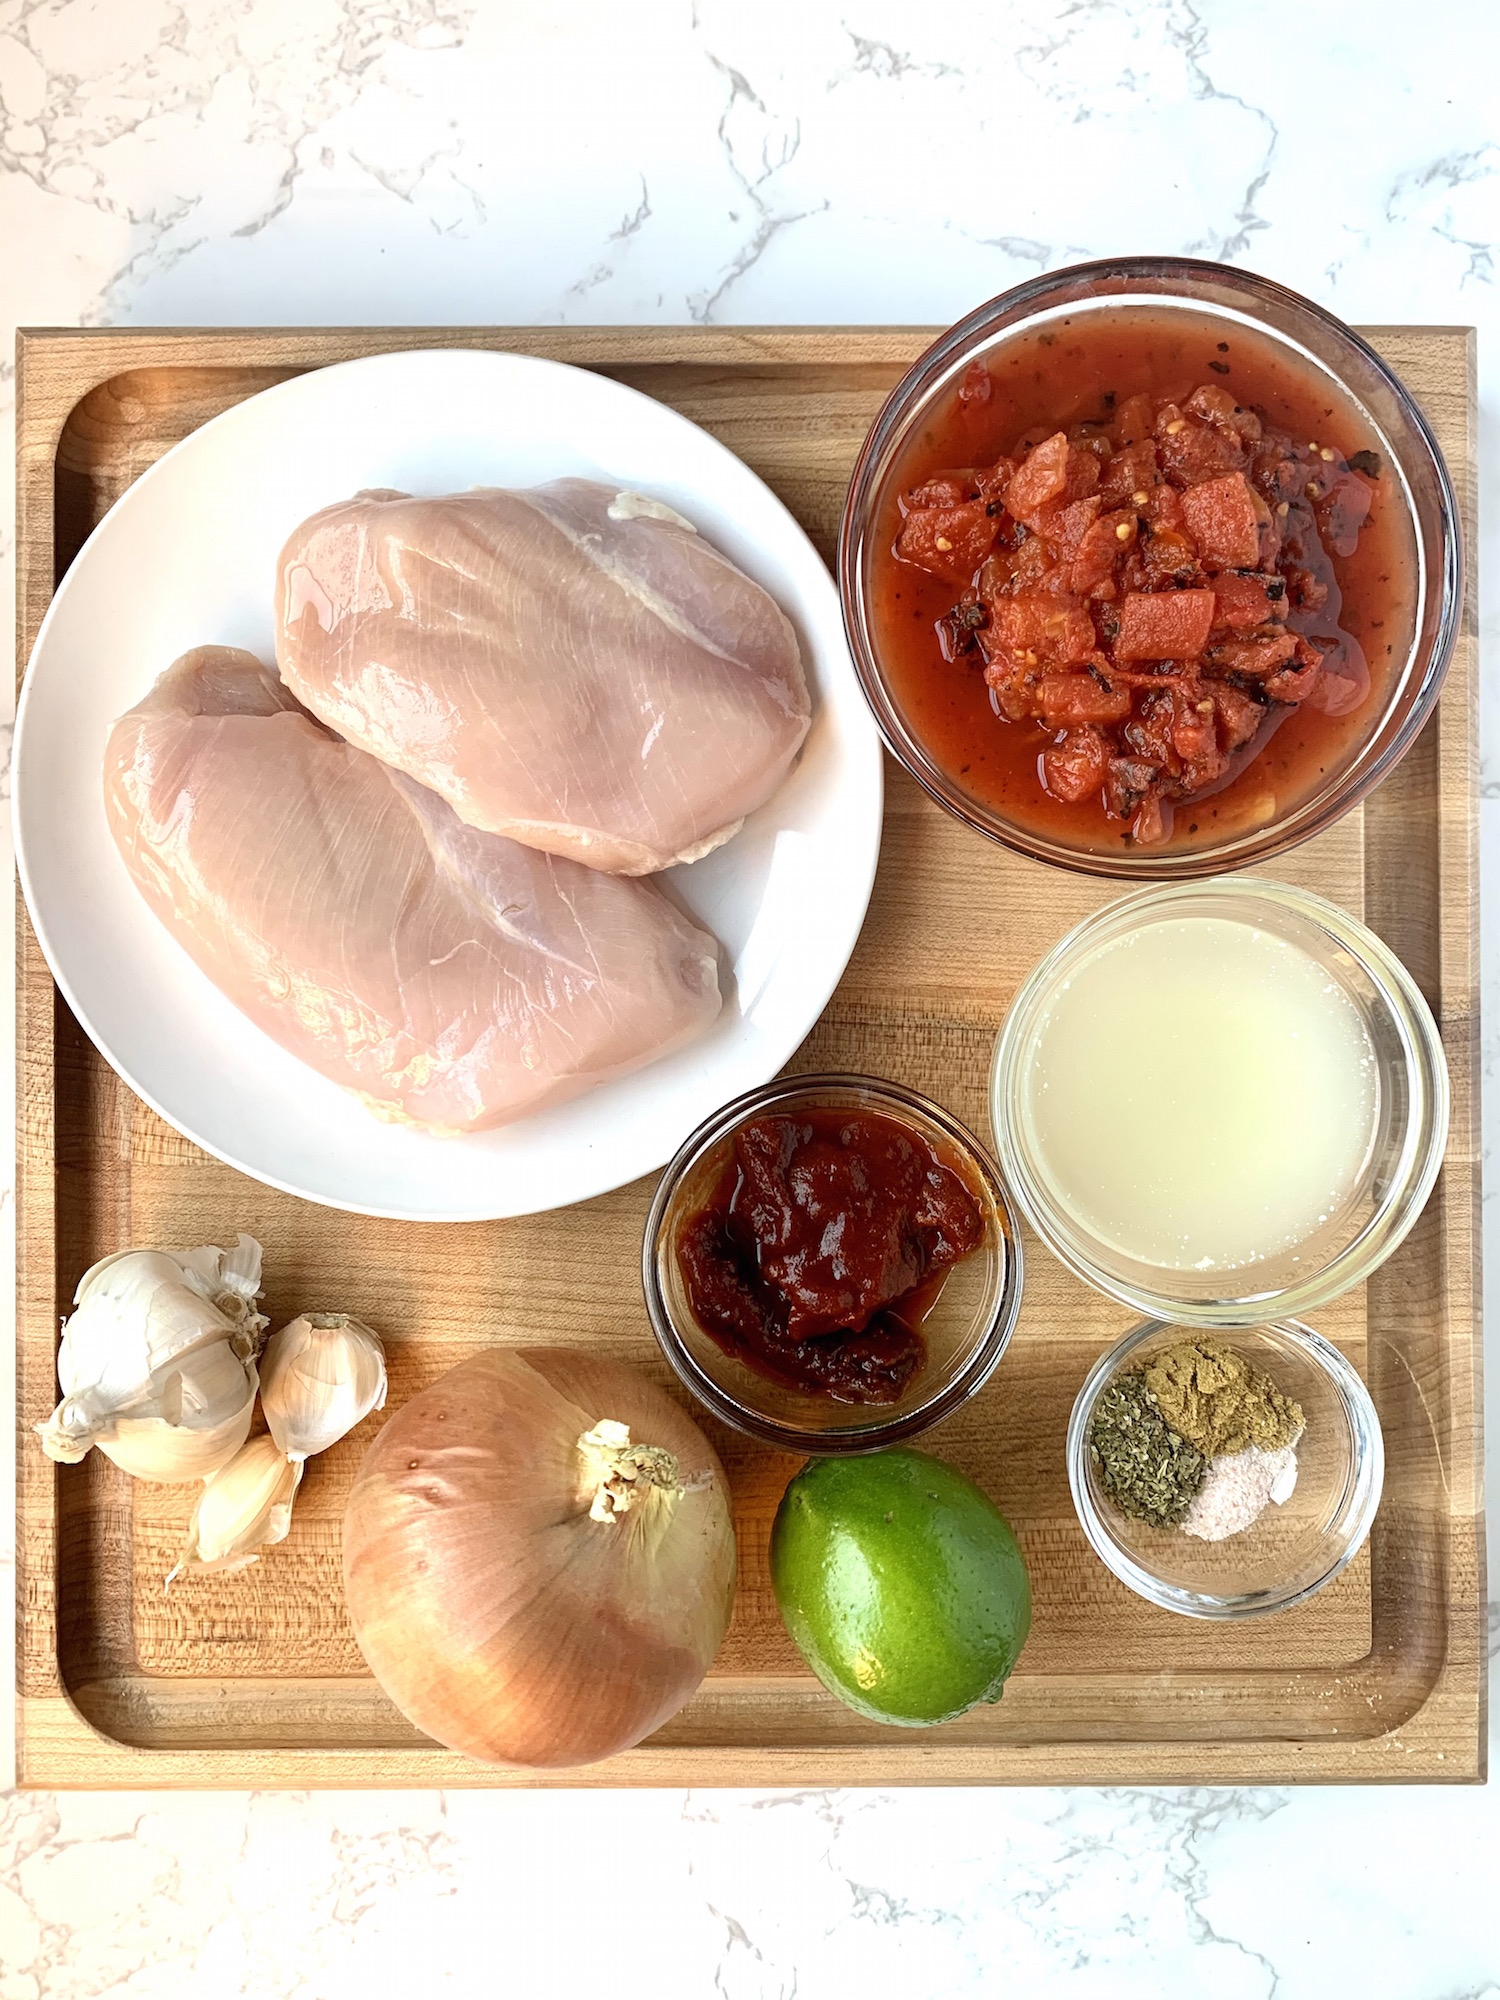 Chicken tinga ingredients in individual bowls on a wood cutting board - raw chicken breasts, fire roasted tomatoes, chicken broth, chipotle chilis in adobo, onion, garlic, lime and spices